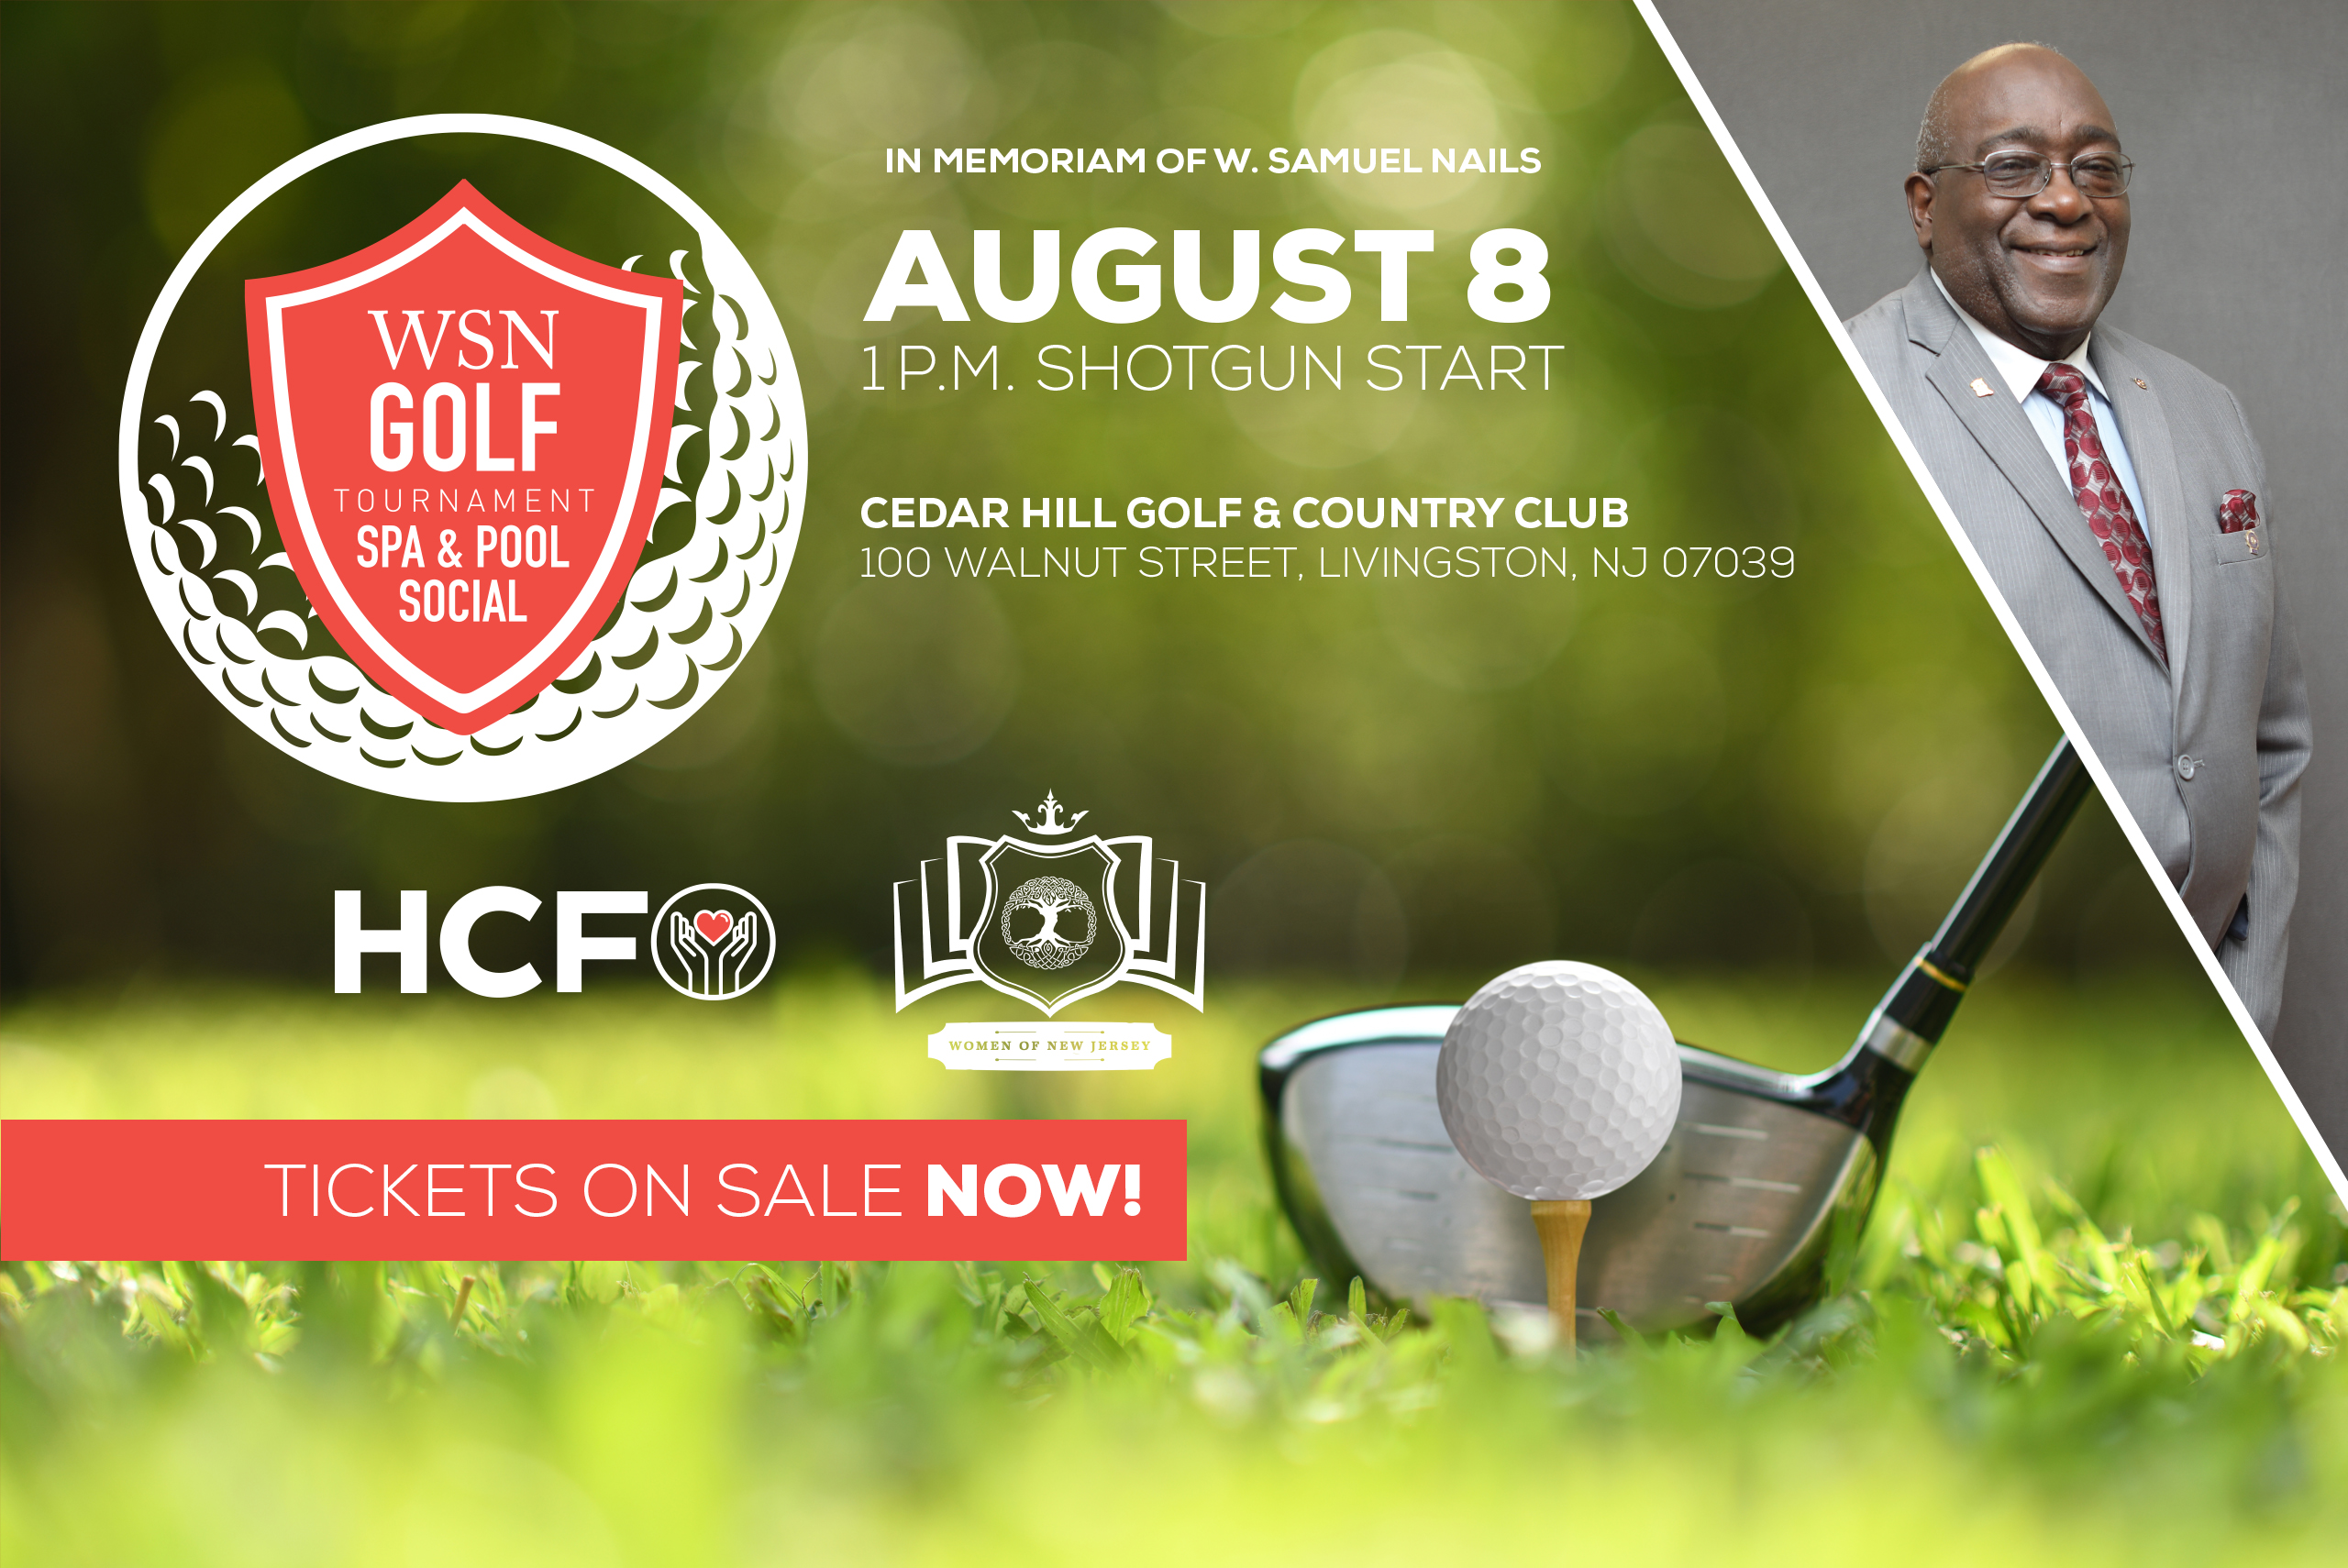 W. Samuel Nails Golf Tournament Spa aand Pool Social, August 8 - Tickets on Sale Now!